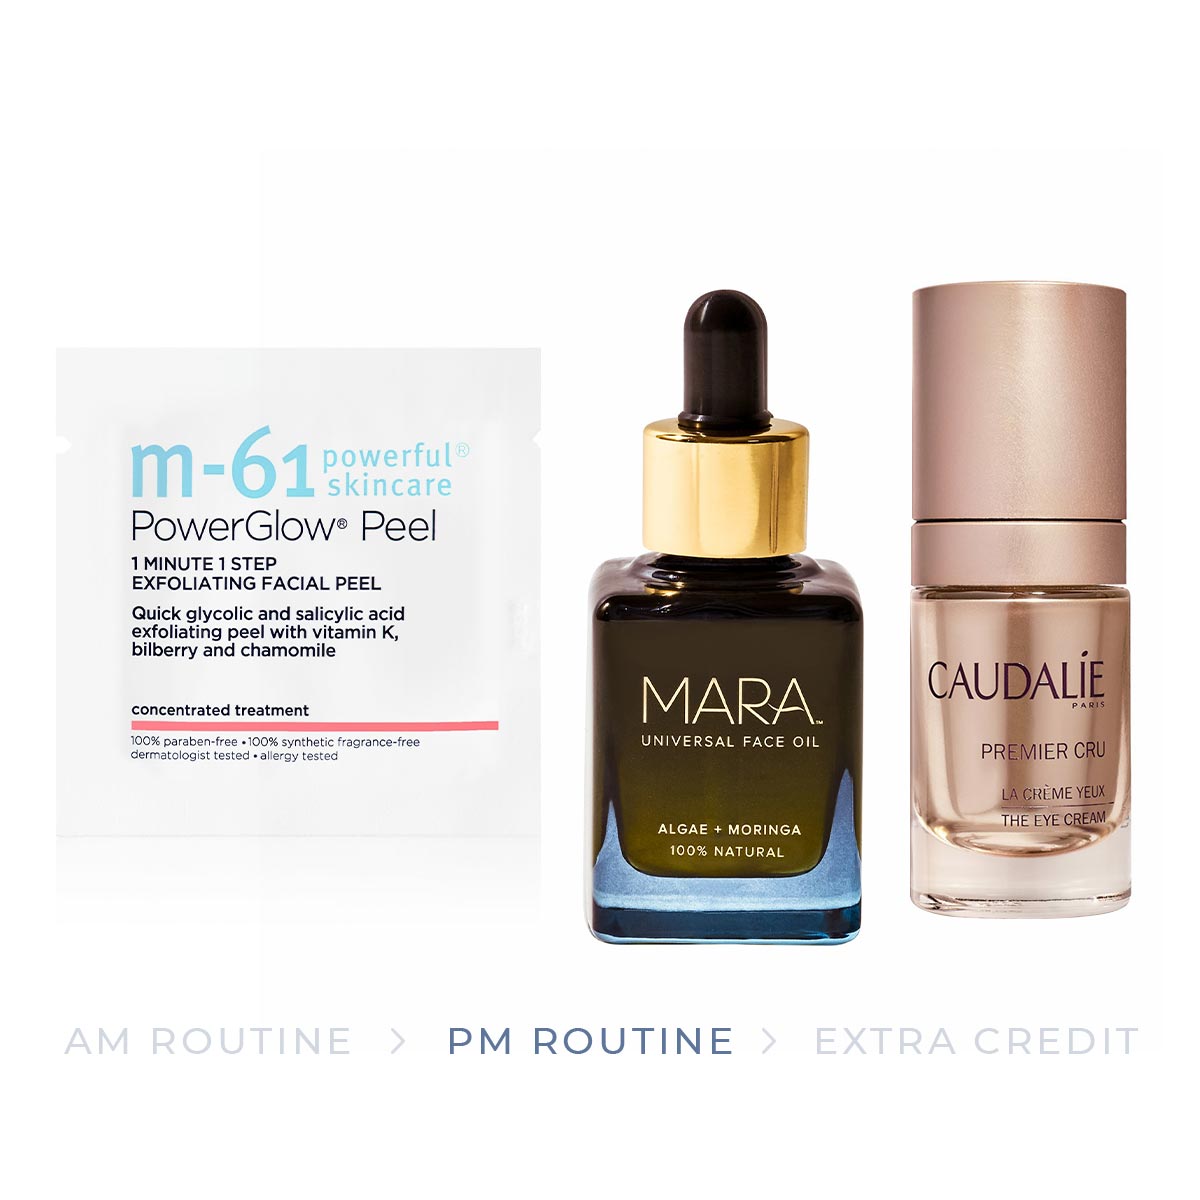 The products for the PM part of the combination skin skincare routine